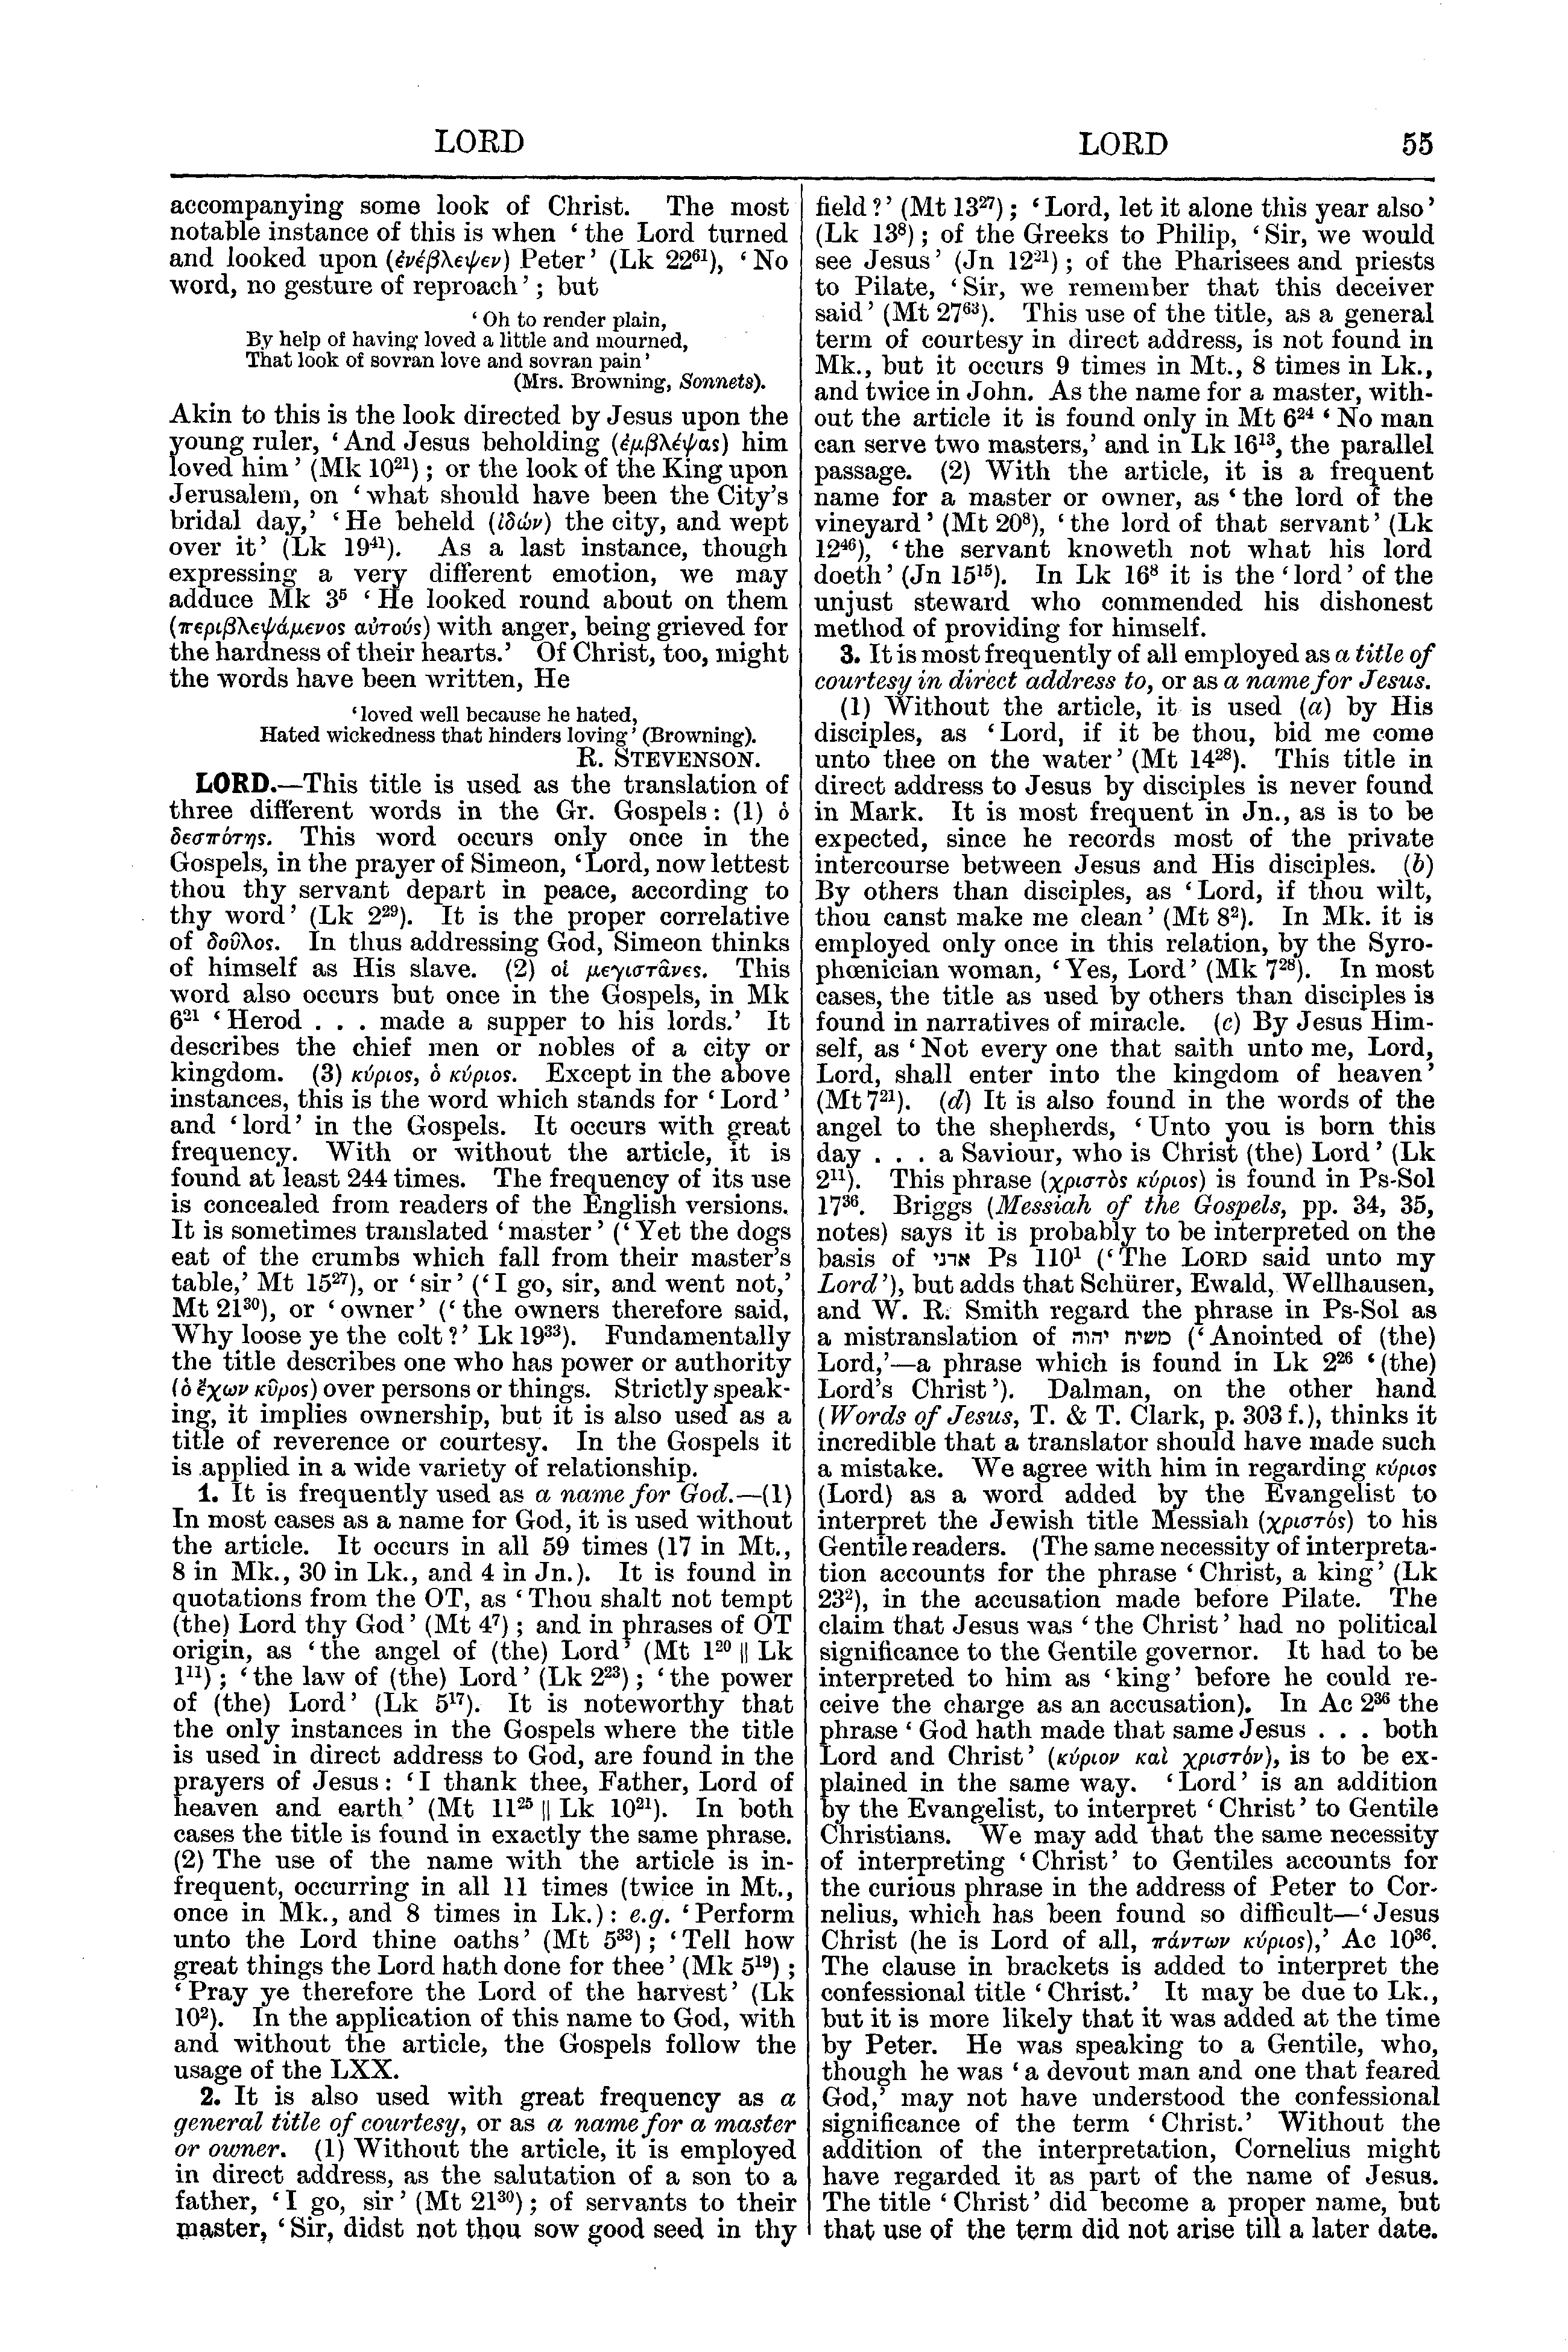 Image of page 55